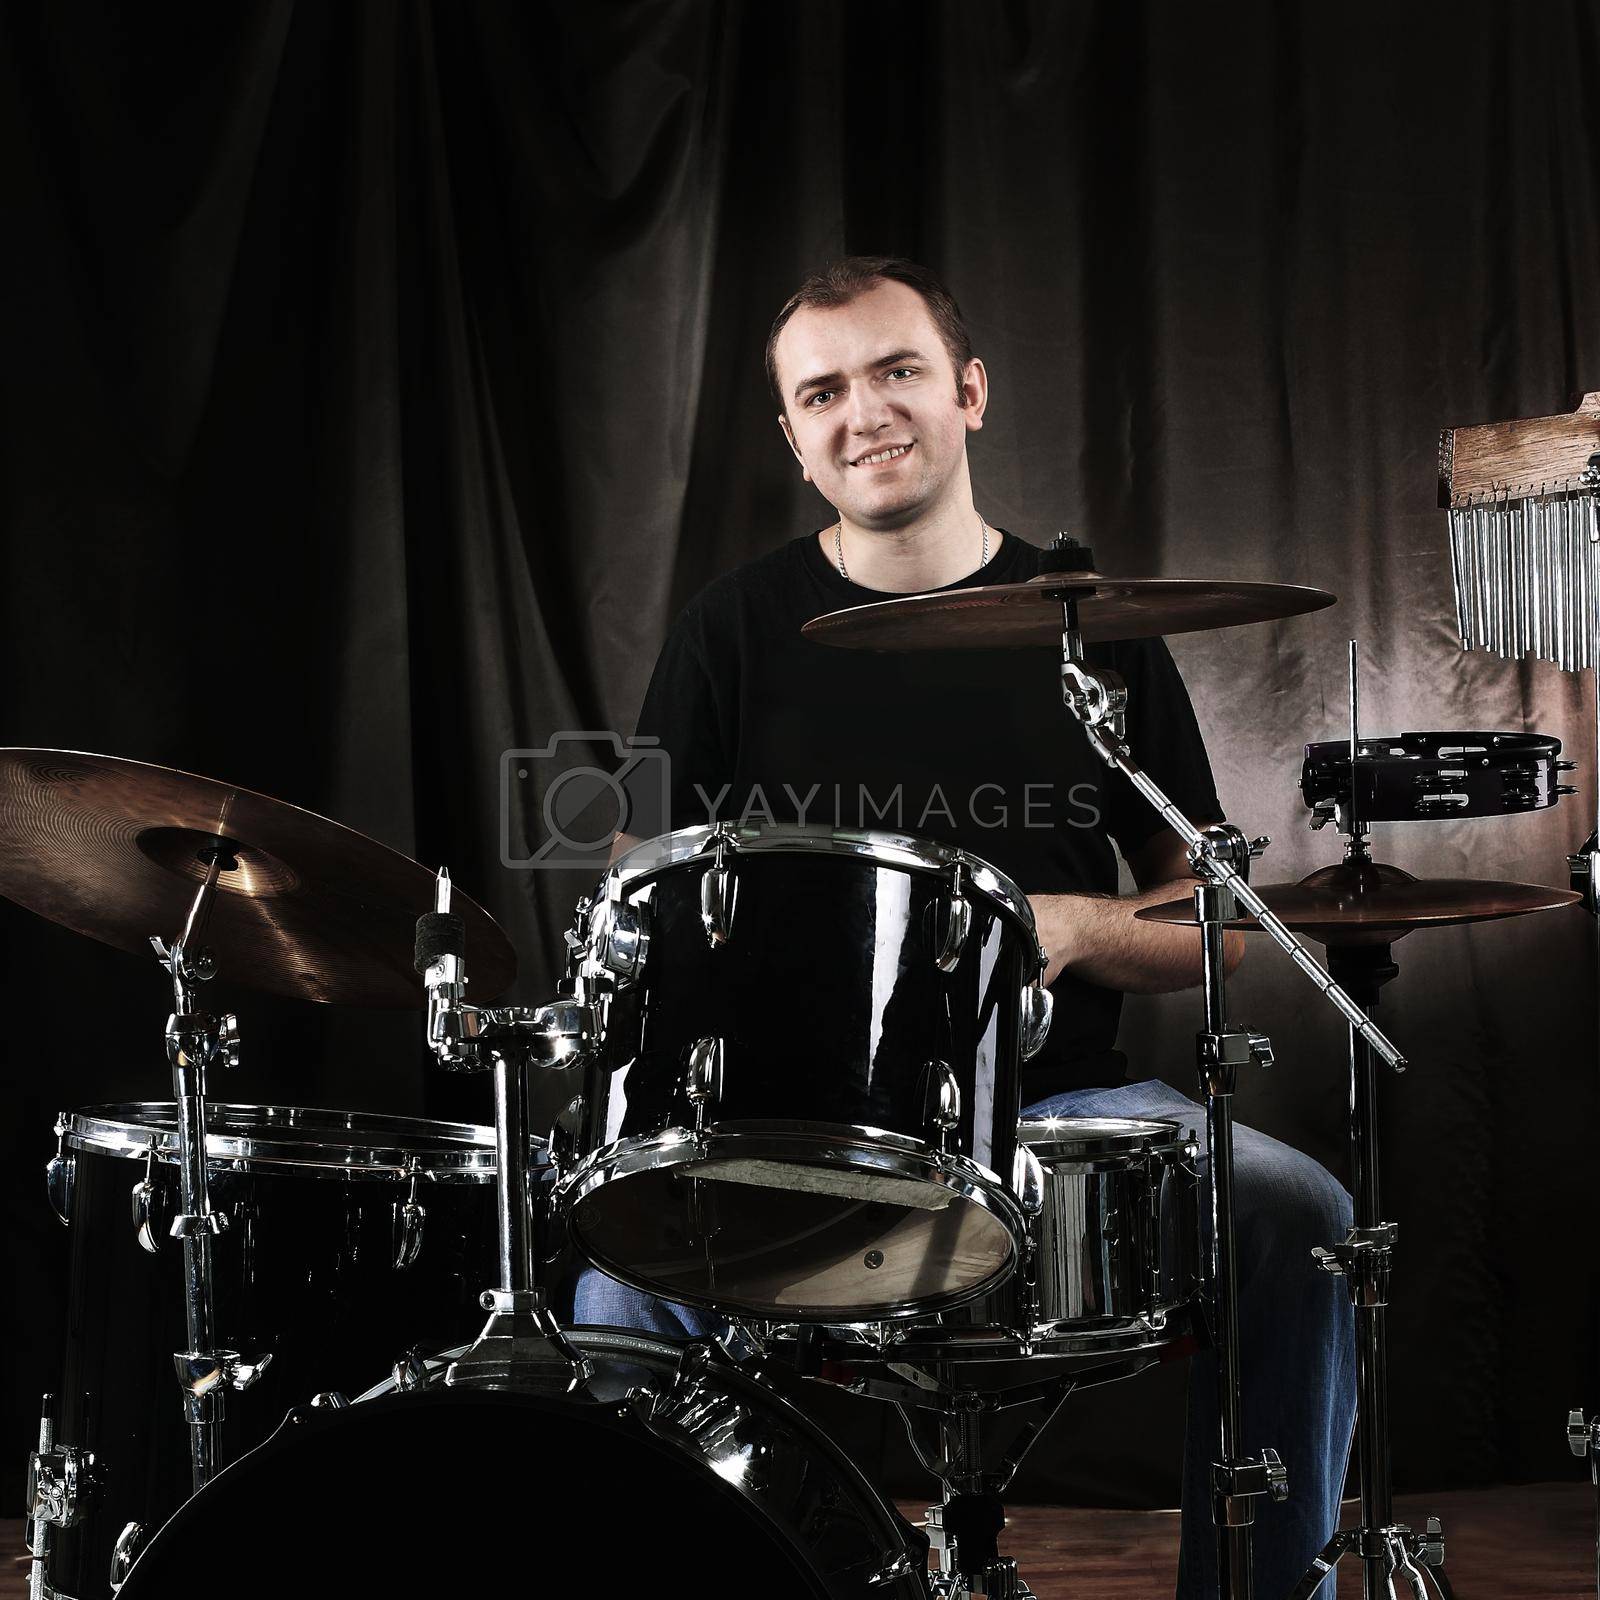 Royalty free image of musician rehearsing on the drums. youth and Hobbies by SmartPhotoLab